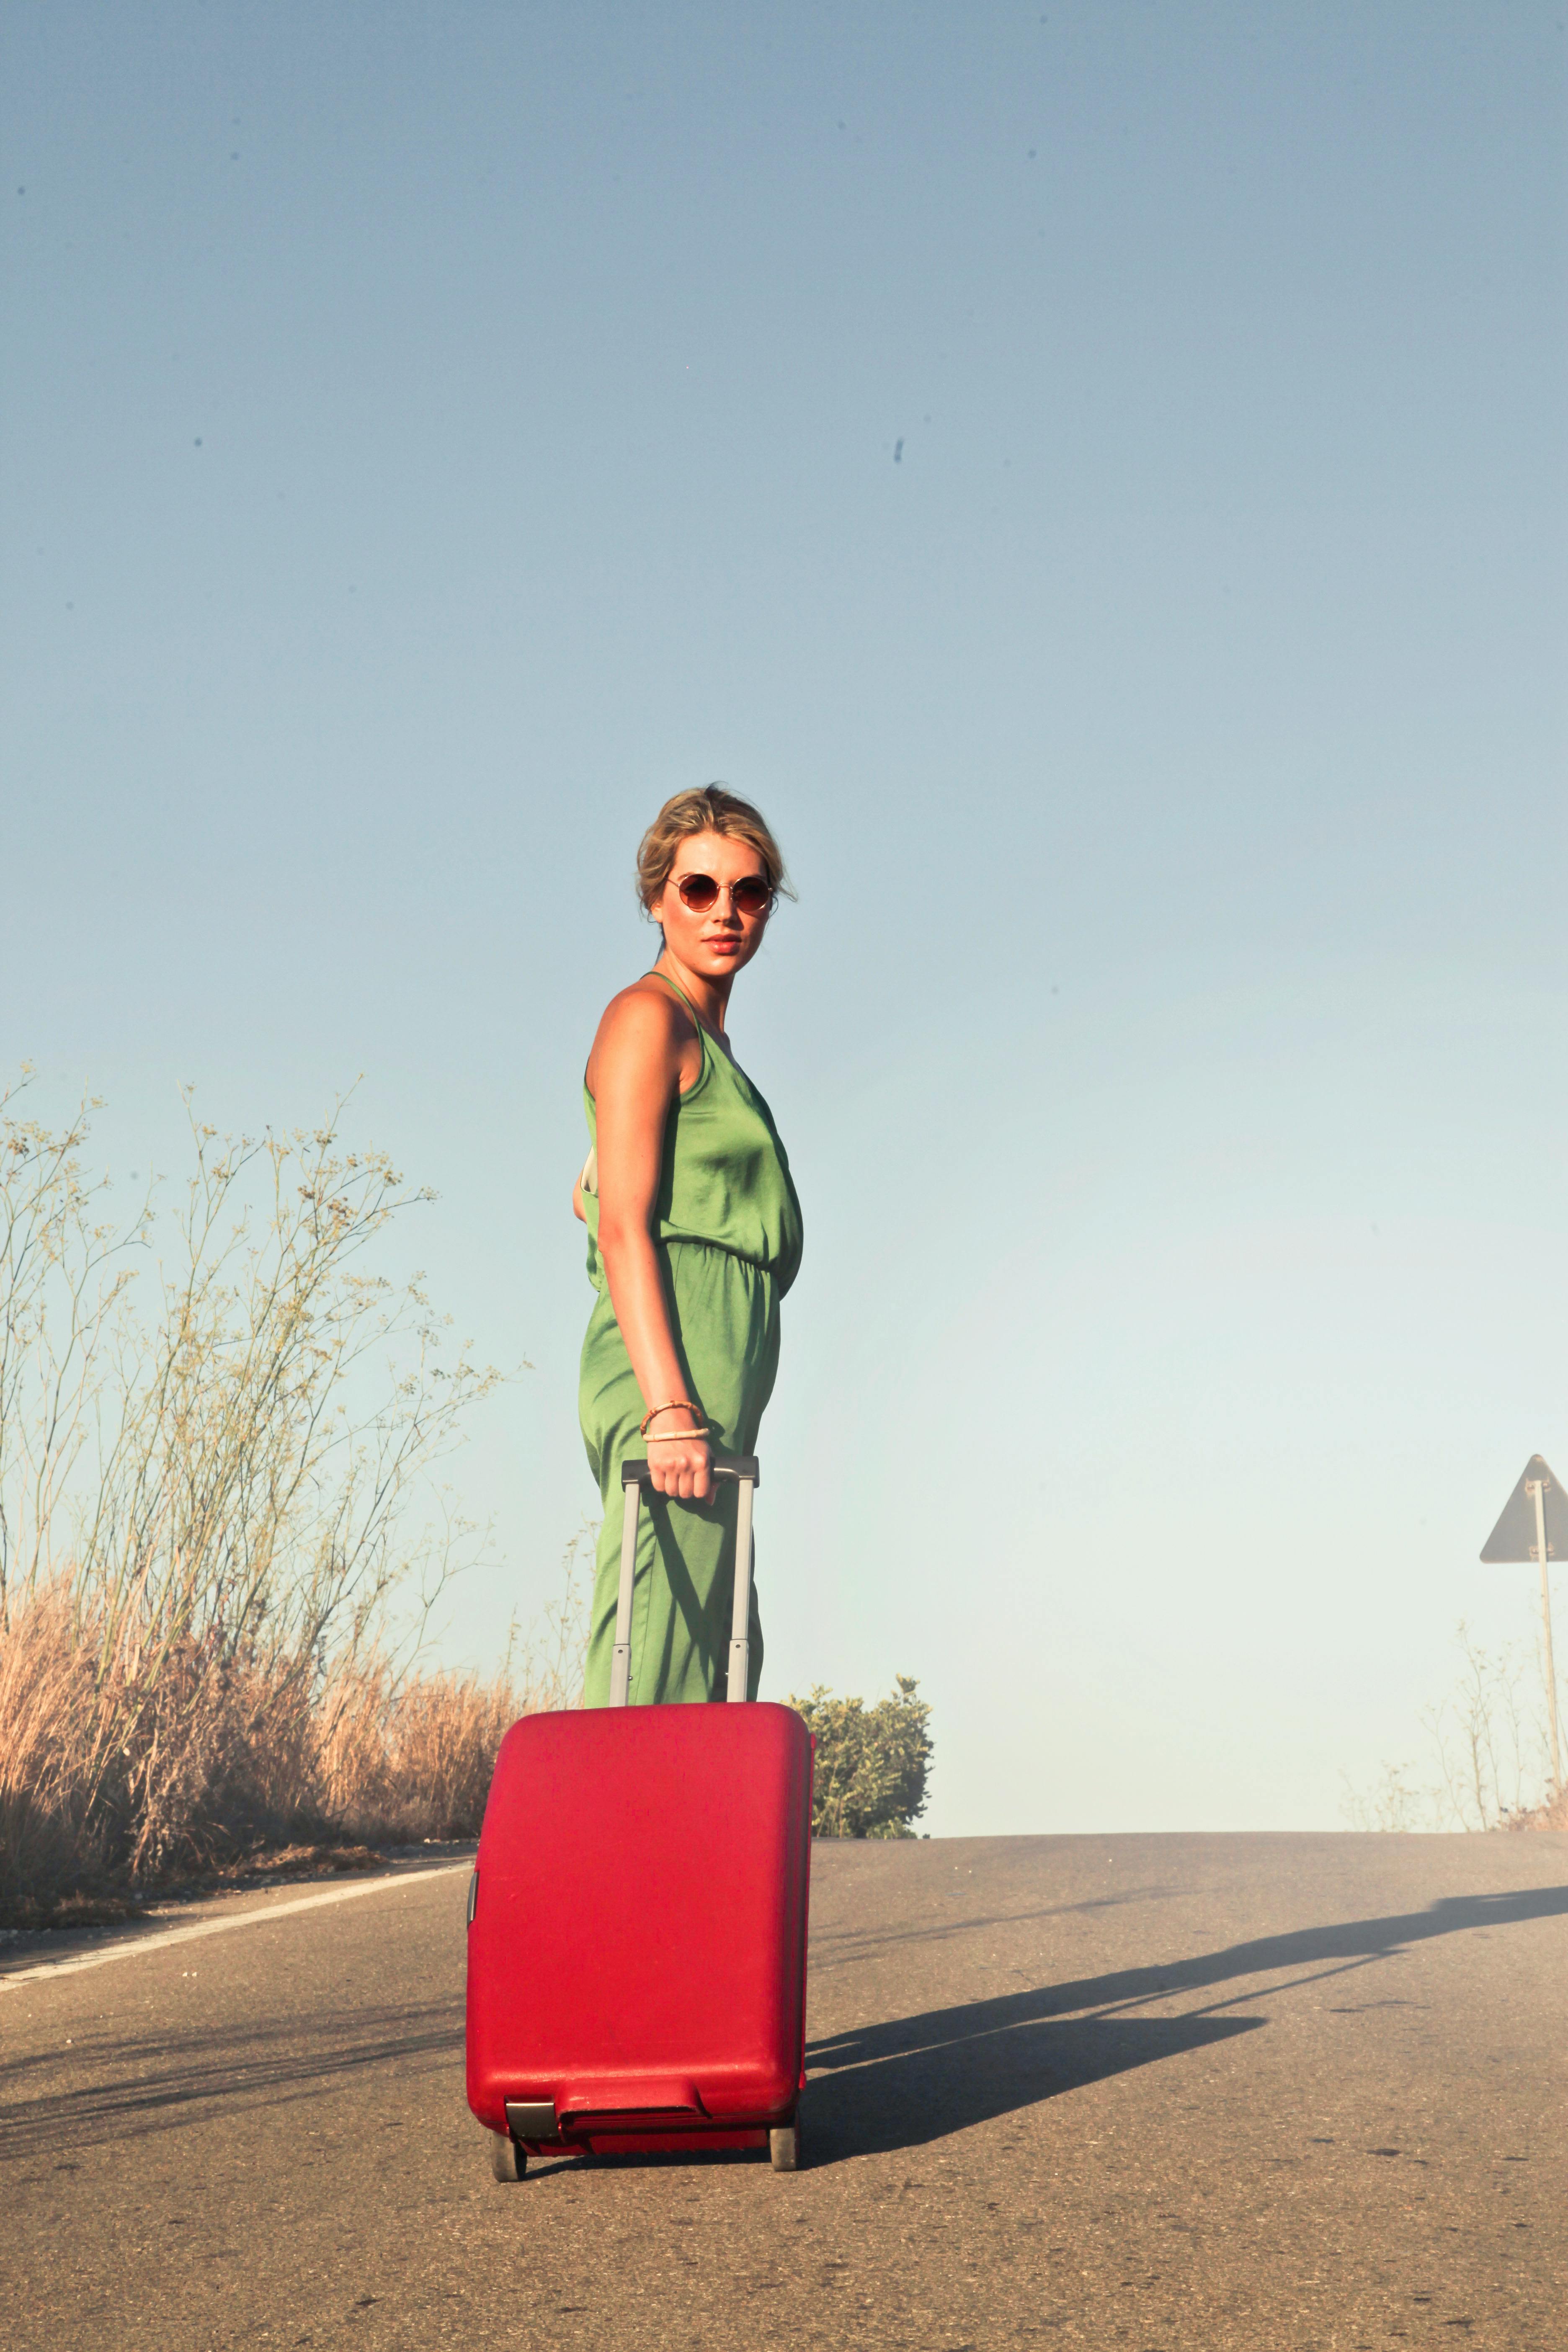 A woman walking with a red suitcase | Source: Pexels